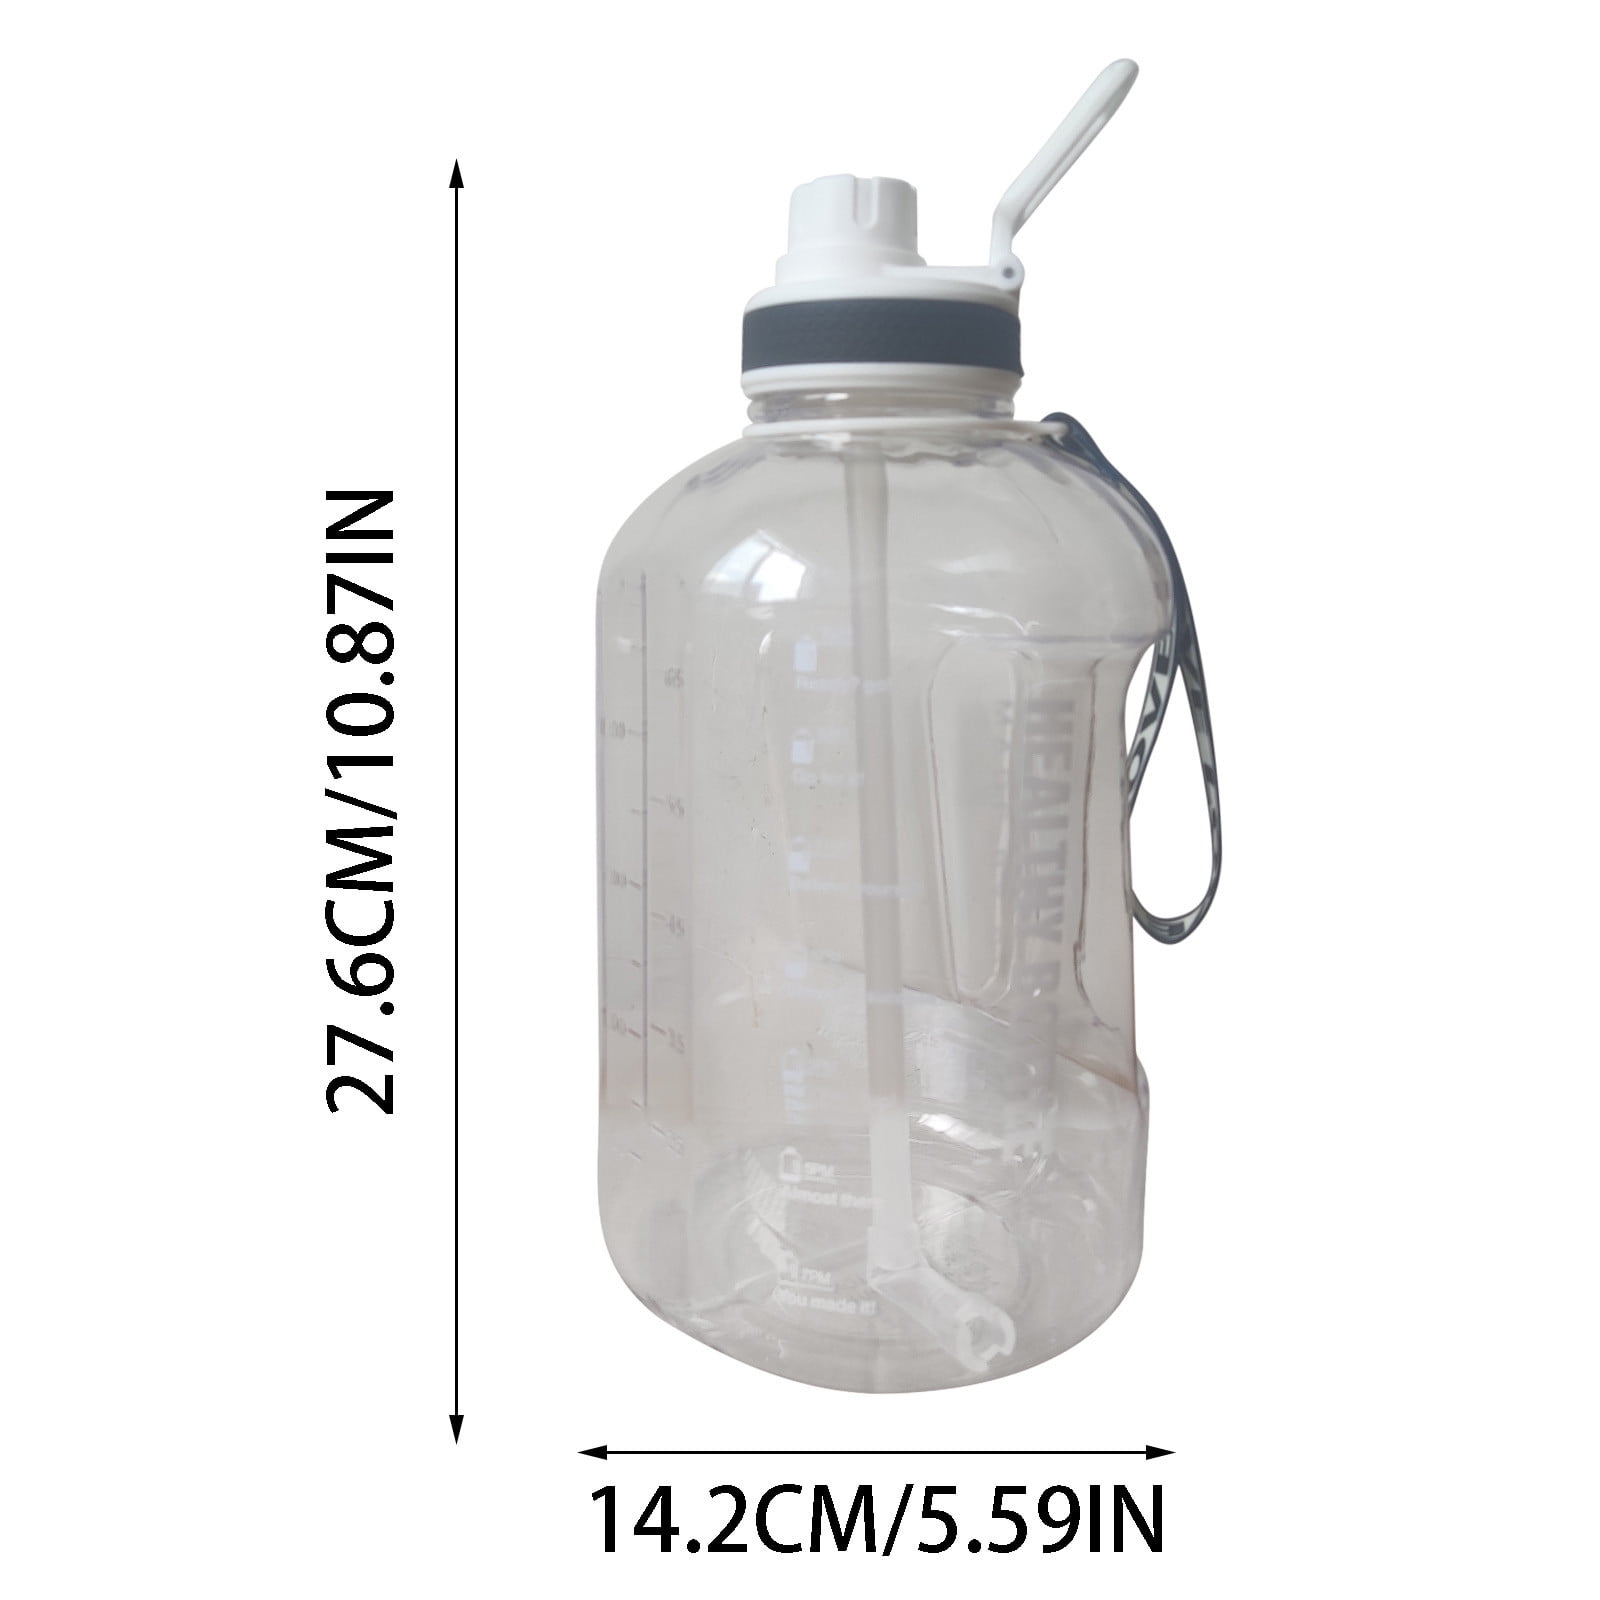  64 OZ Insulated Water Bottle With Straw, AOZEX Stainless Steel  Half Gallon Large Water Bottle For Gym Workout, Double Wall 1/2 Gallon  Metal Water Bottle Big Sports Water Bottle Jug For